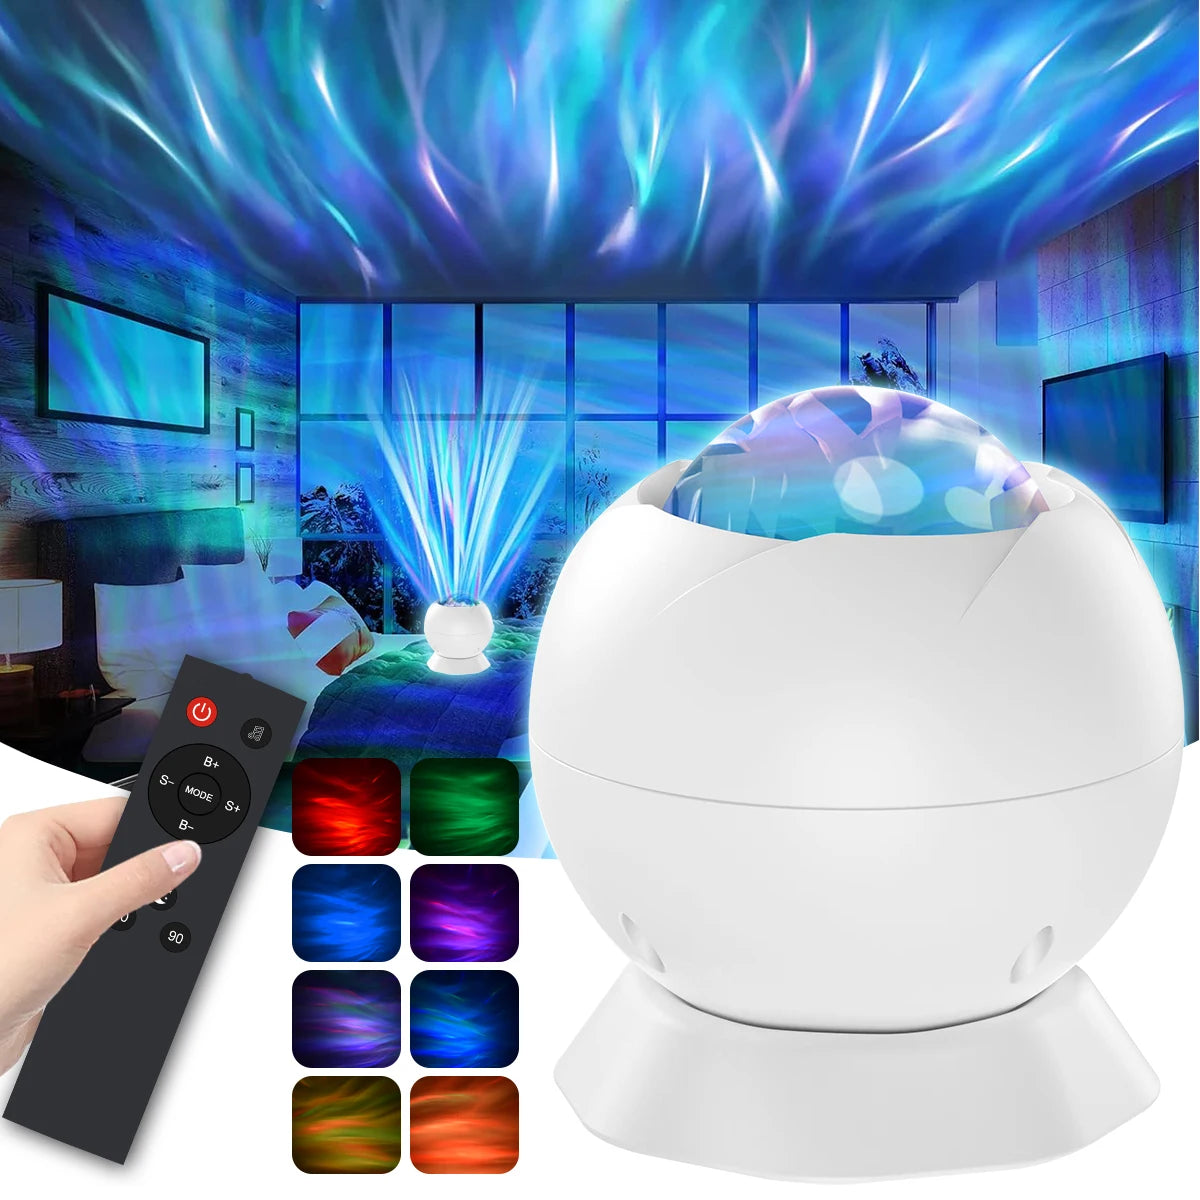 Galaxy Projector Light for Bedroom Aurora Night Light Room Decor for Kids and Adult with Remote Control Ideal Gift for Birthday